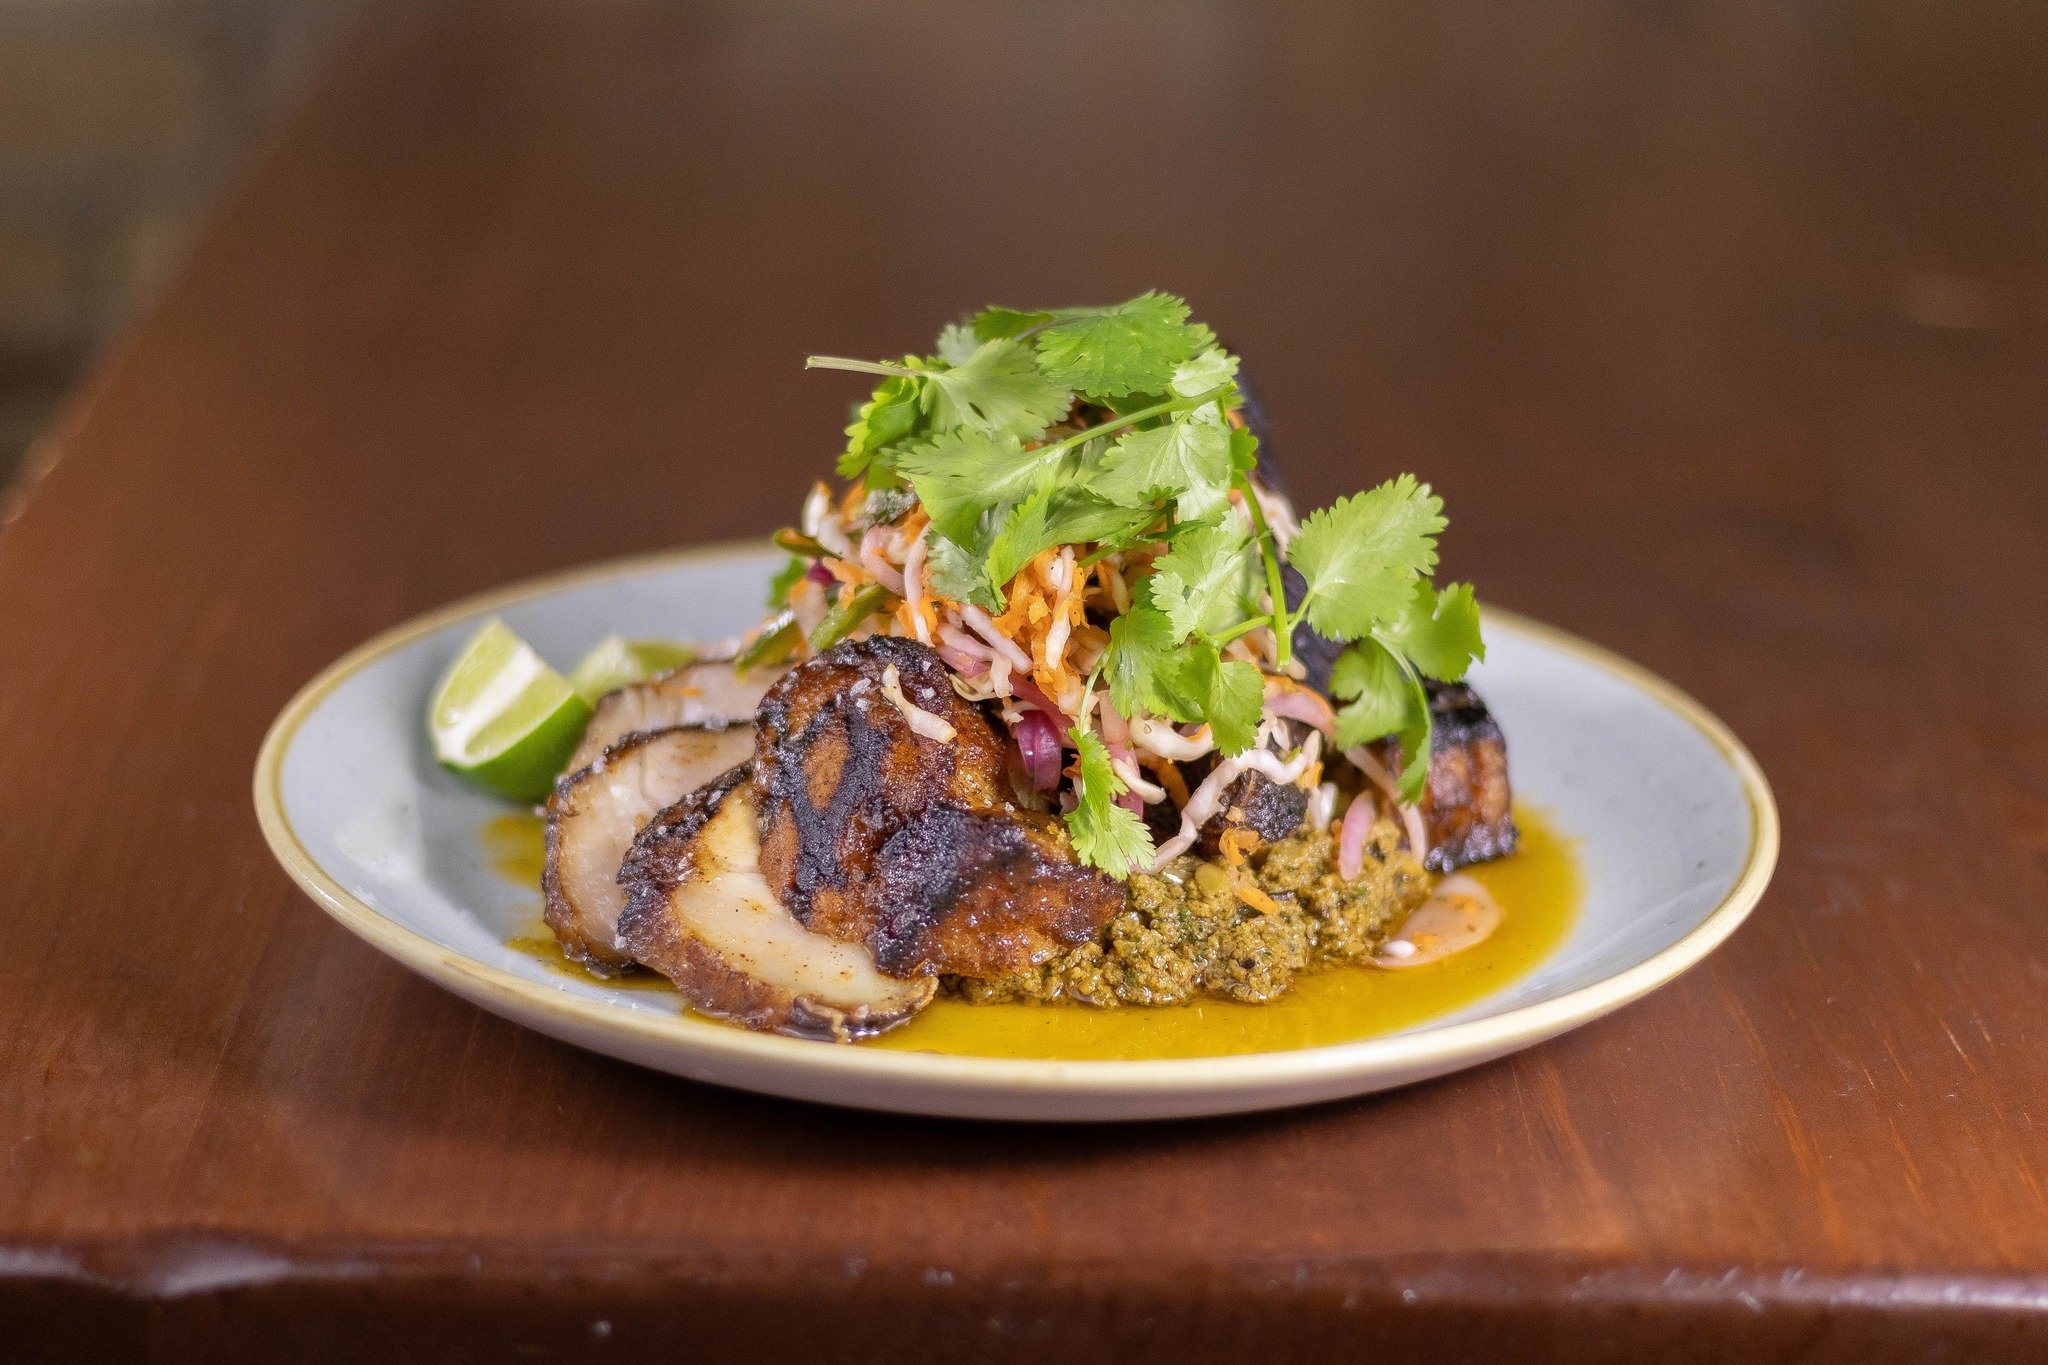 Our new pork chop is marinated in al pastor spice, grilled &amp; glazed with agave, habanero &amp; citrus. It's served with a pepita &amp; tomato sikil p'ak and pickled carrot &amp; cabbage curtido. Available at dinnertime daily 🔥